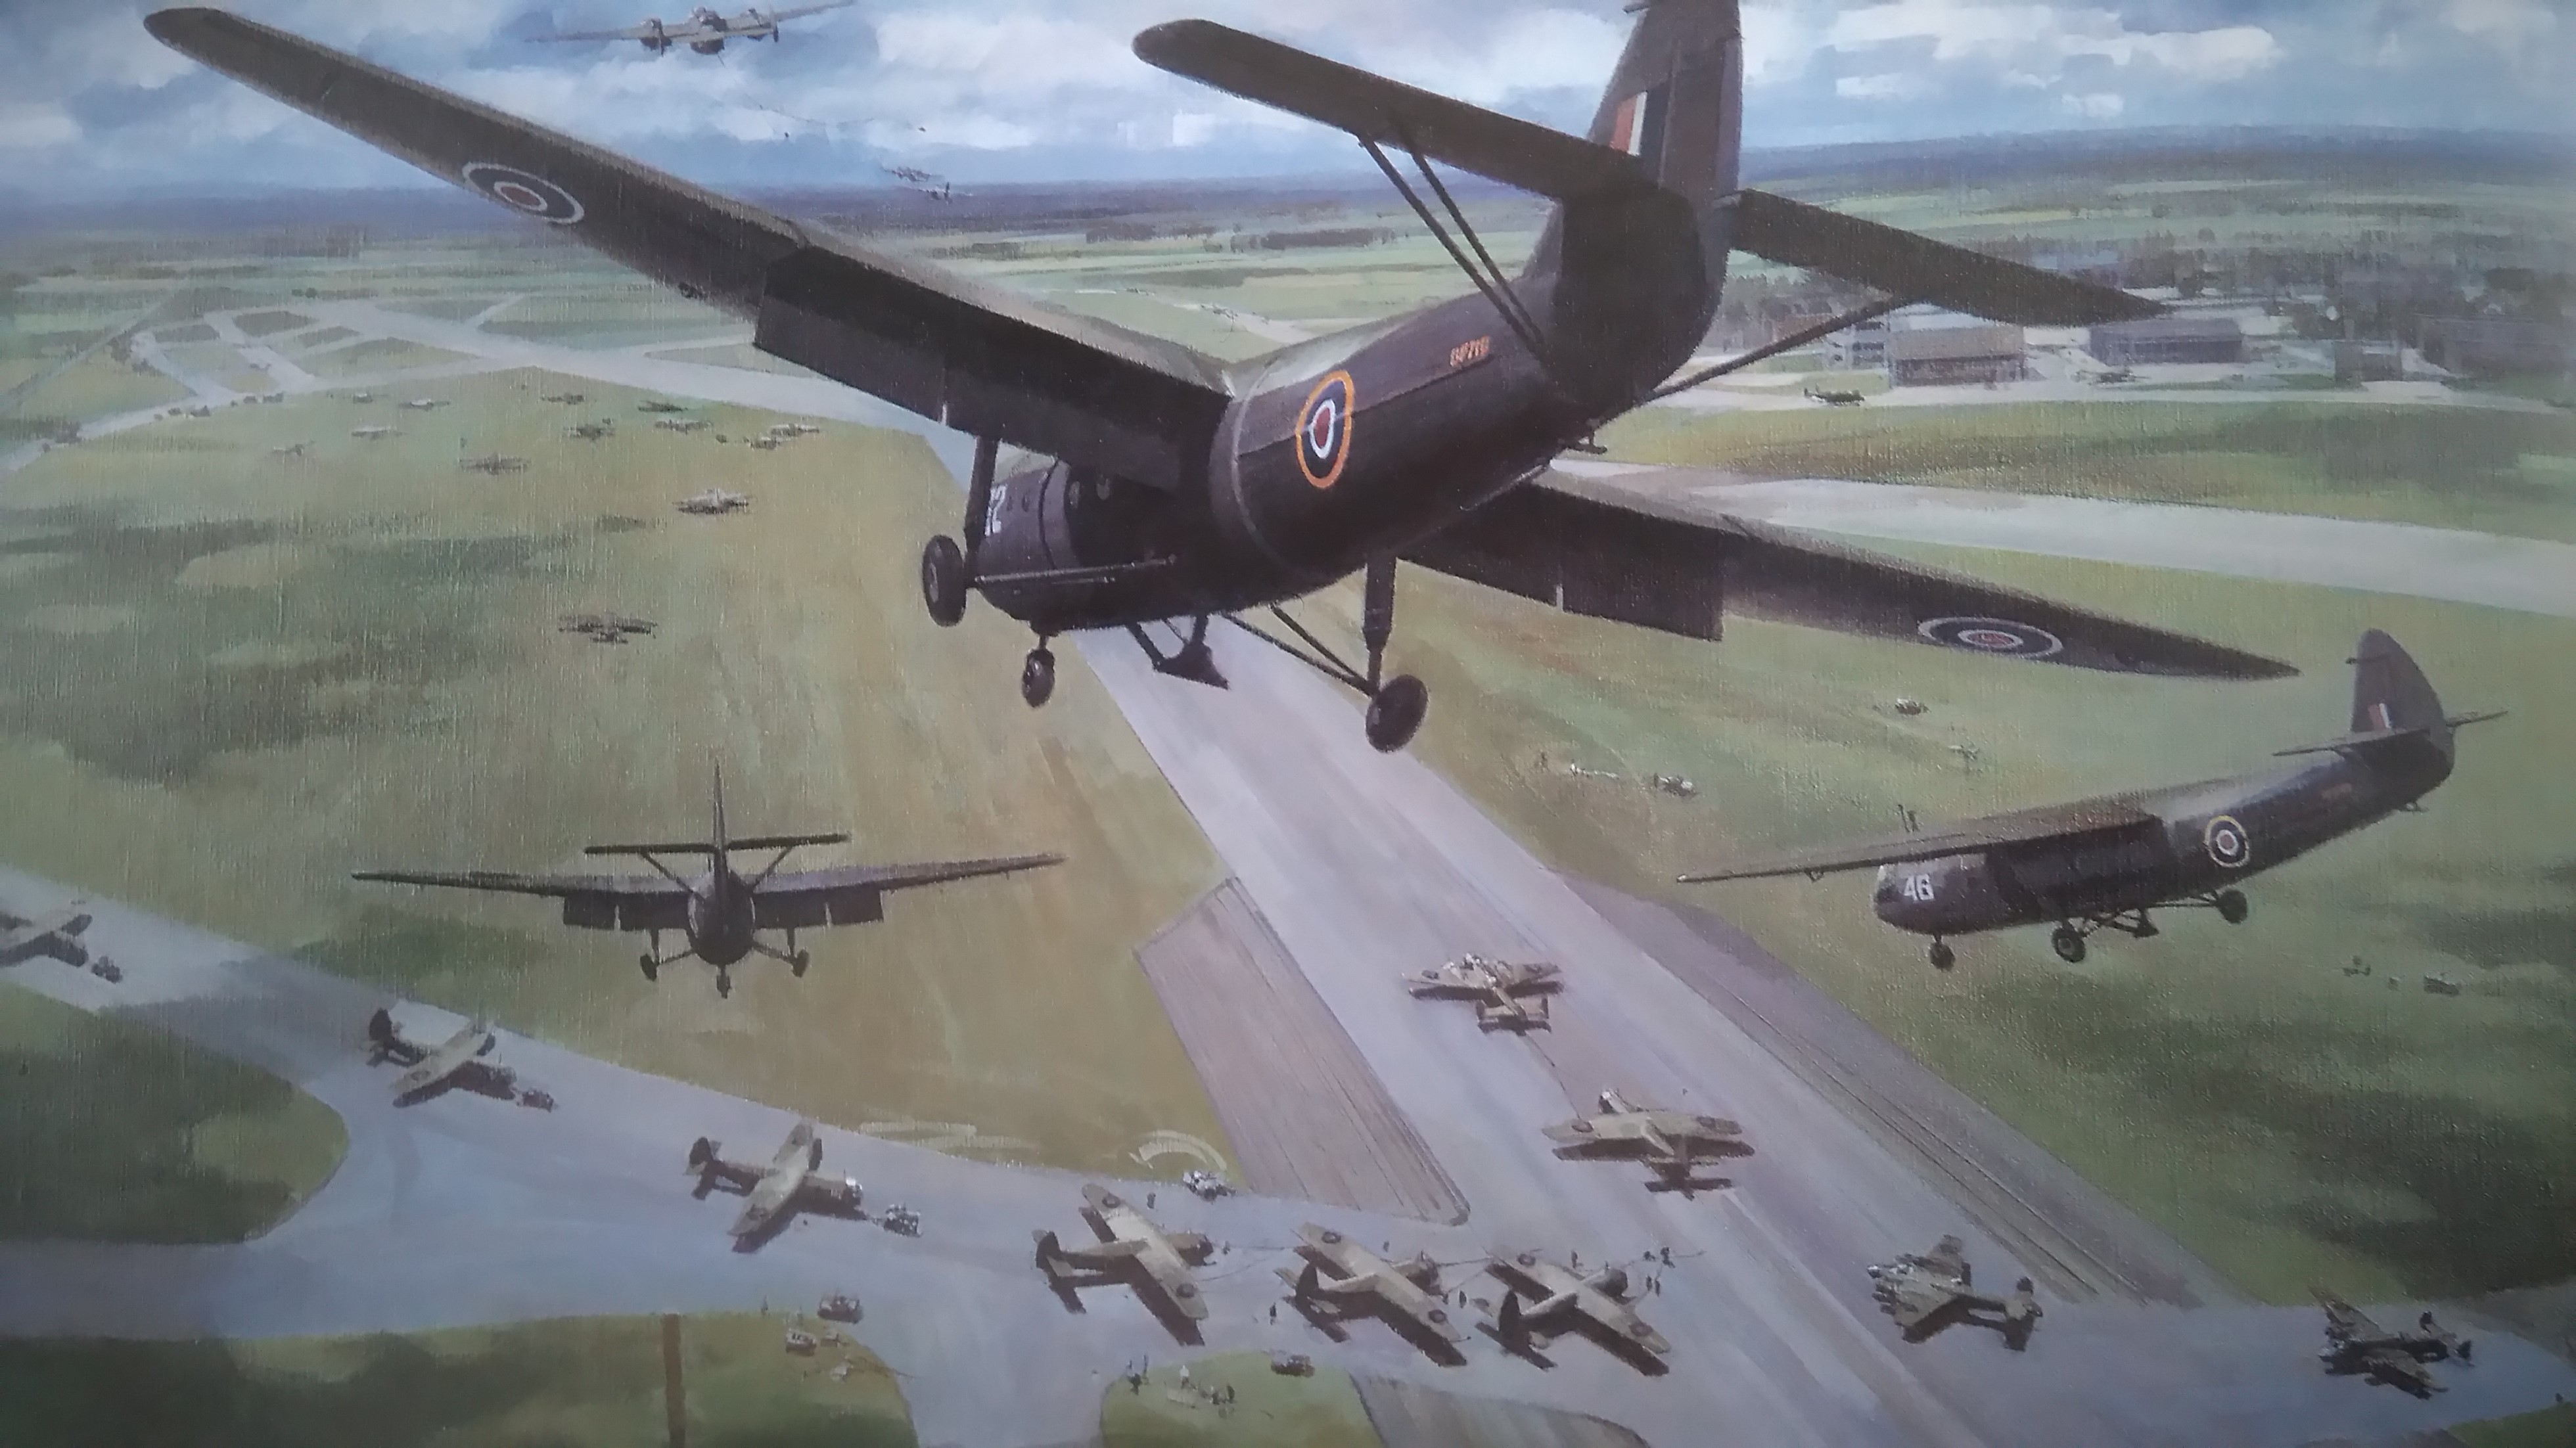 Image: Painting of Horsa gliders at RAF Brize Norton